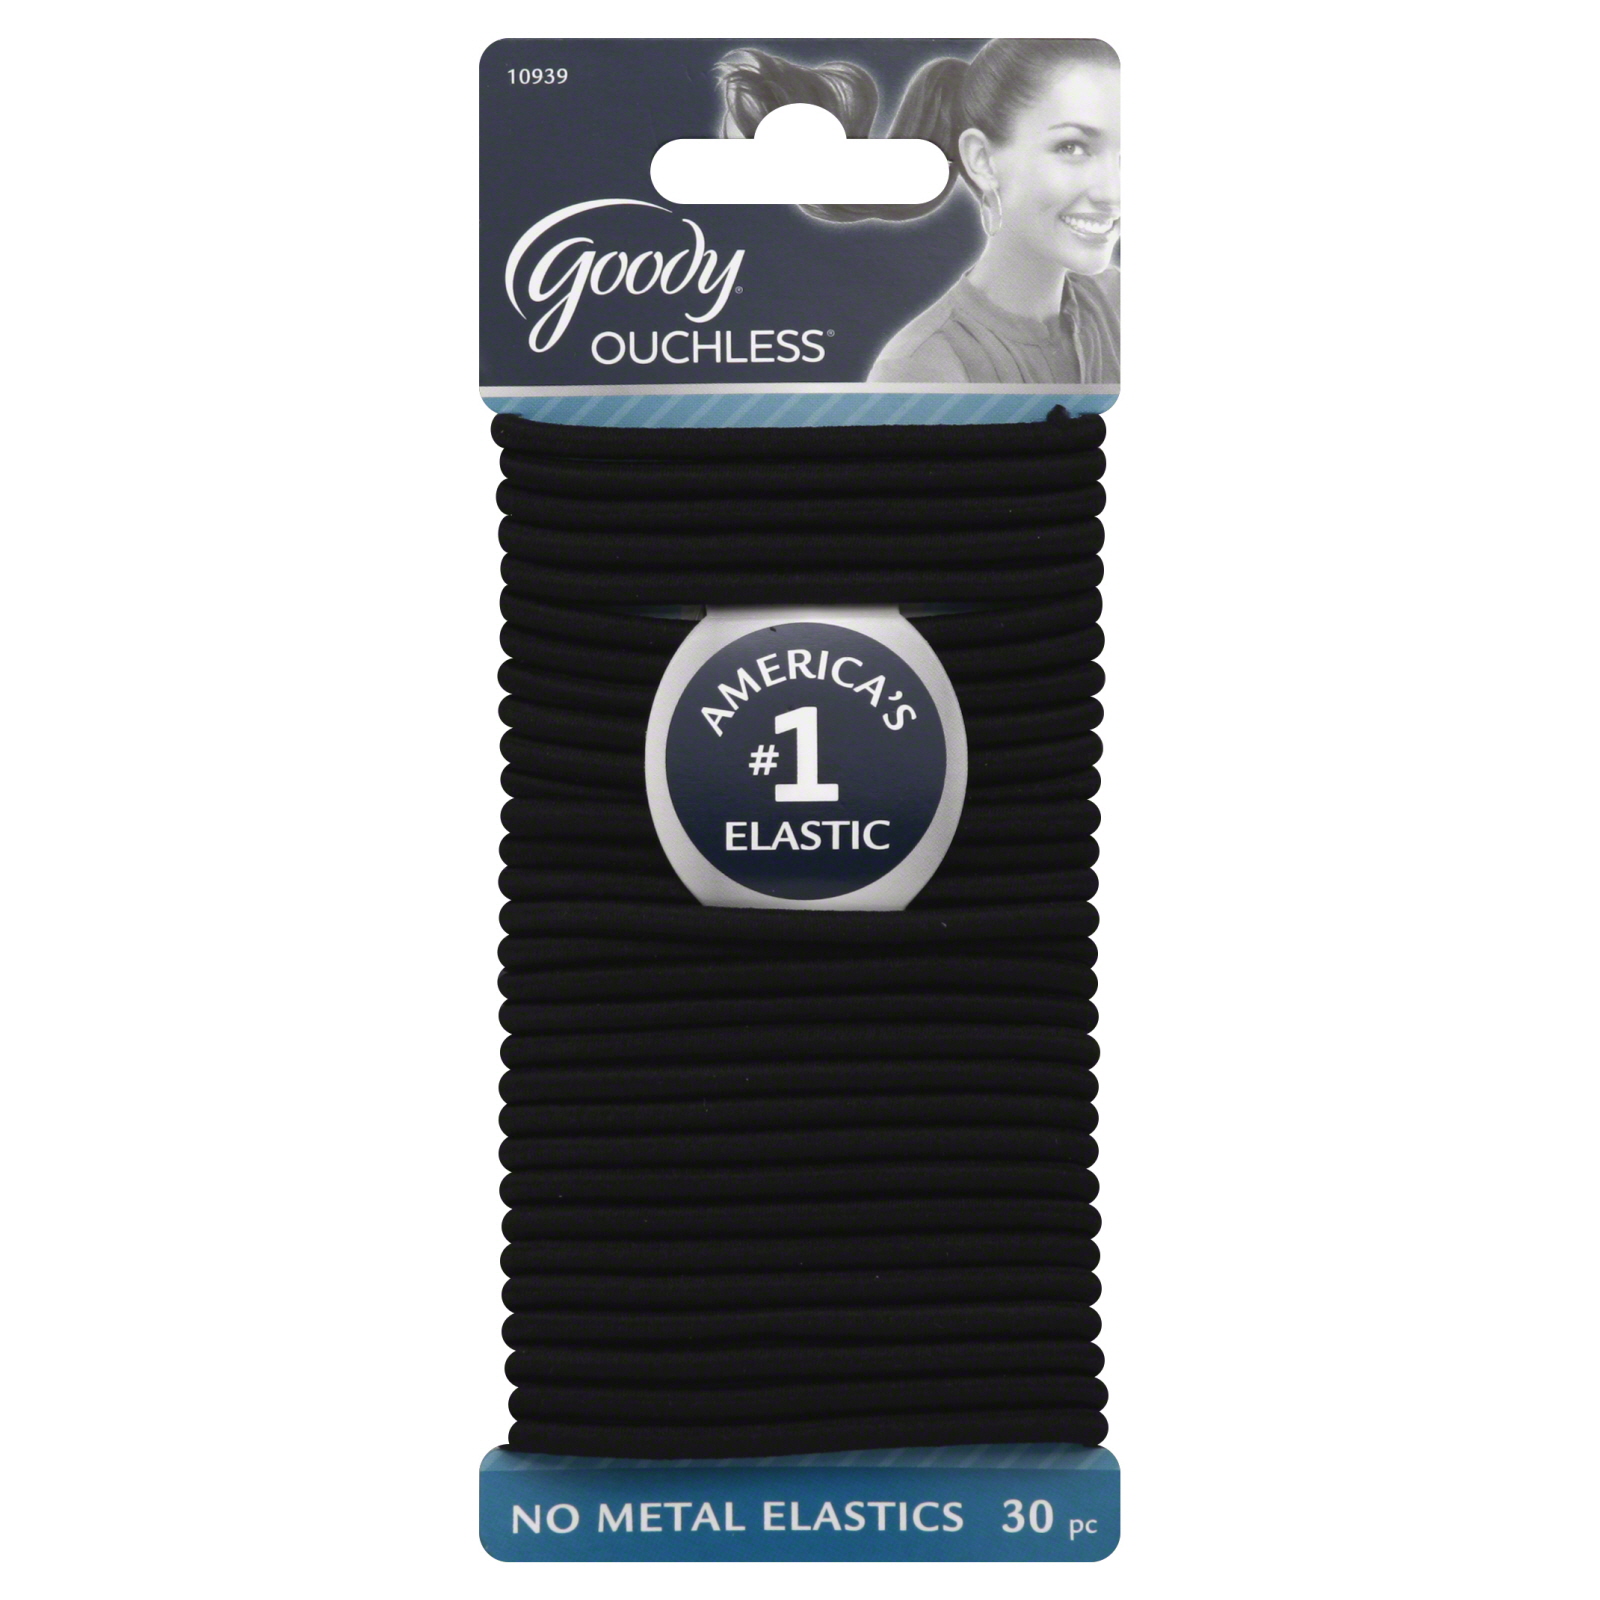 Goody Ouchless 4 MM Elastics, No Metal, Black, 30 Ct